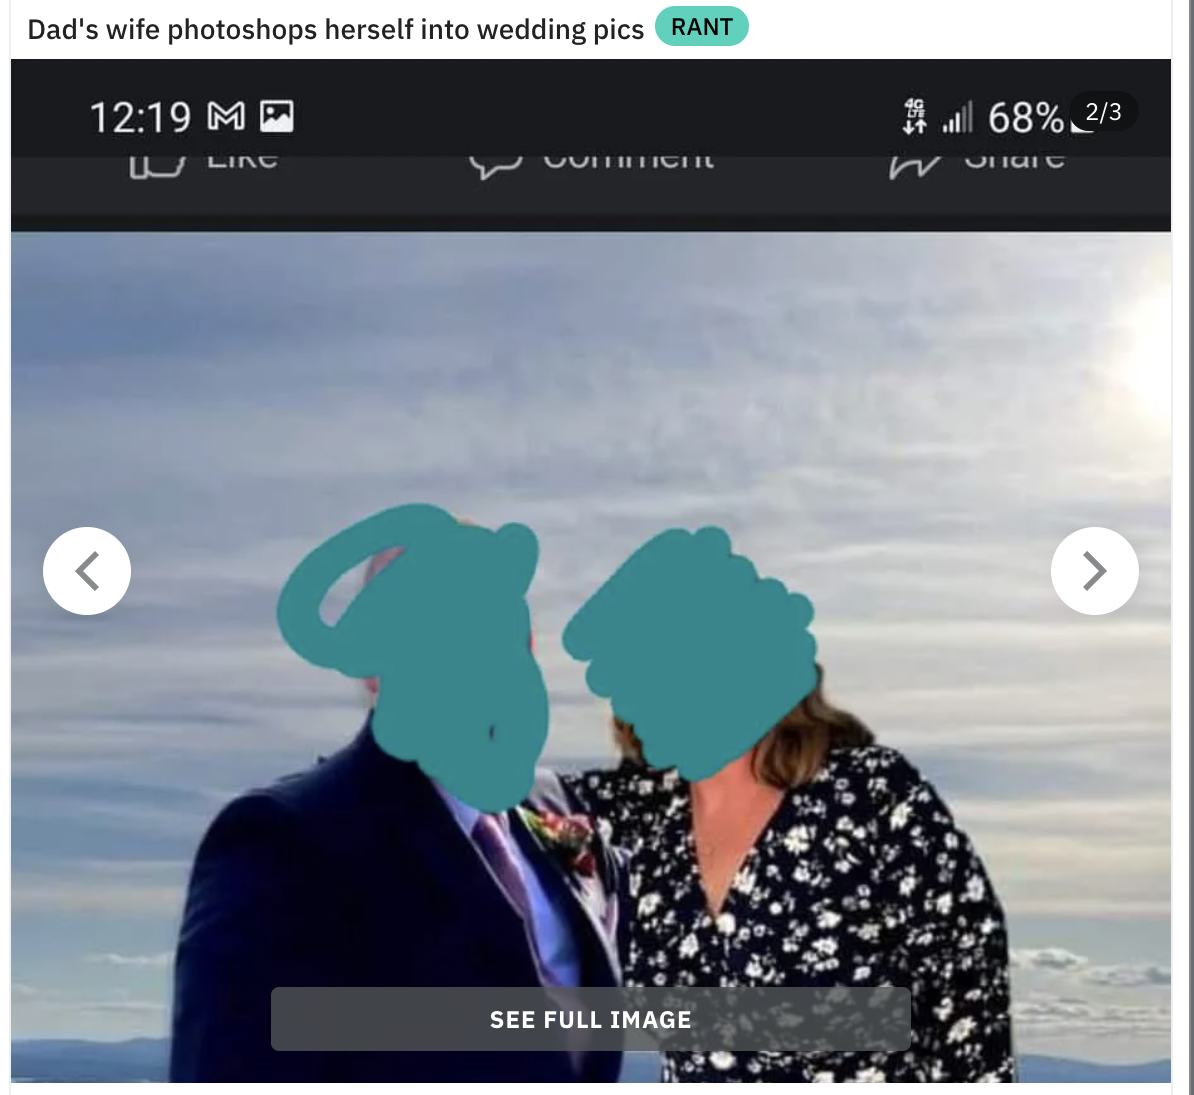 Trashy Weddings Moments - website - Dad's wife photoshops herself into wedding pics Rant Mp Line 1 l 68% 23 W Huic Uuter Tichil  See Full Image